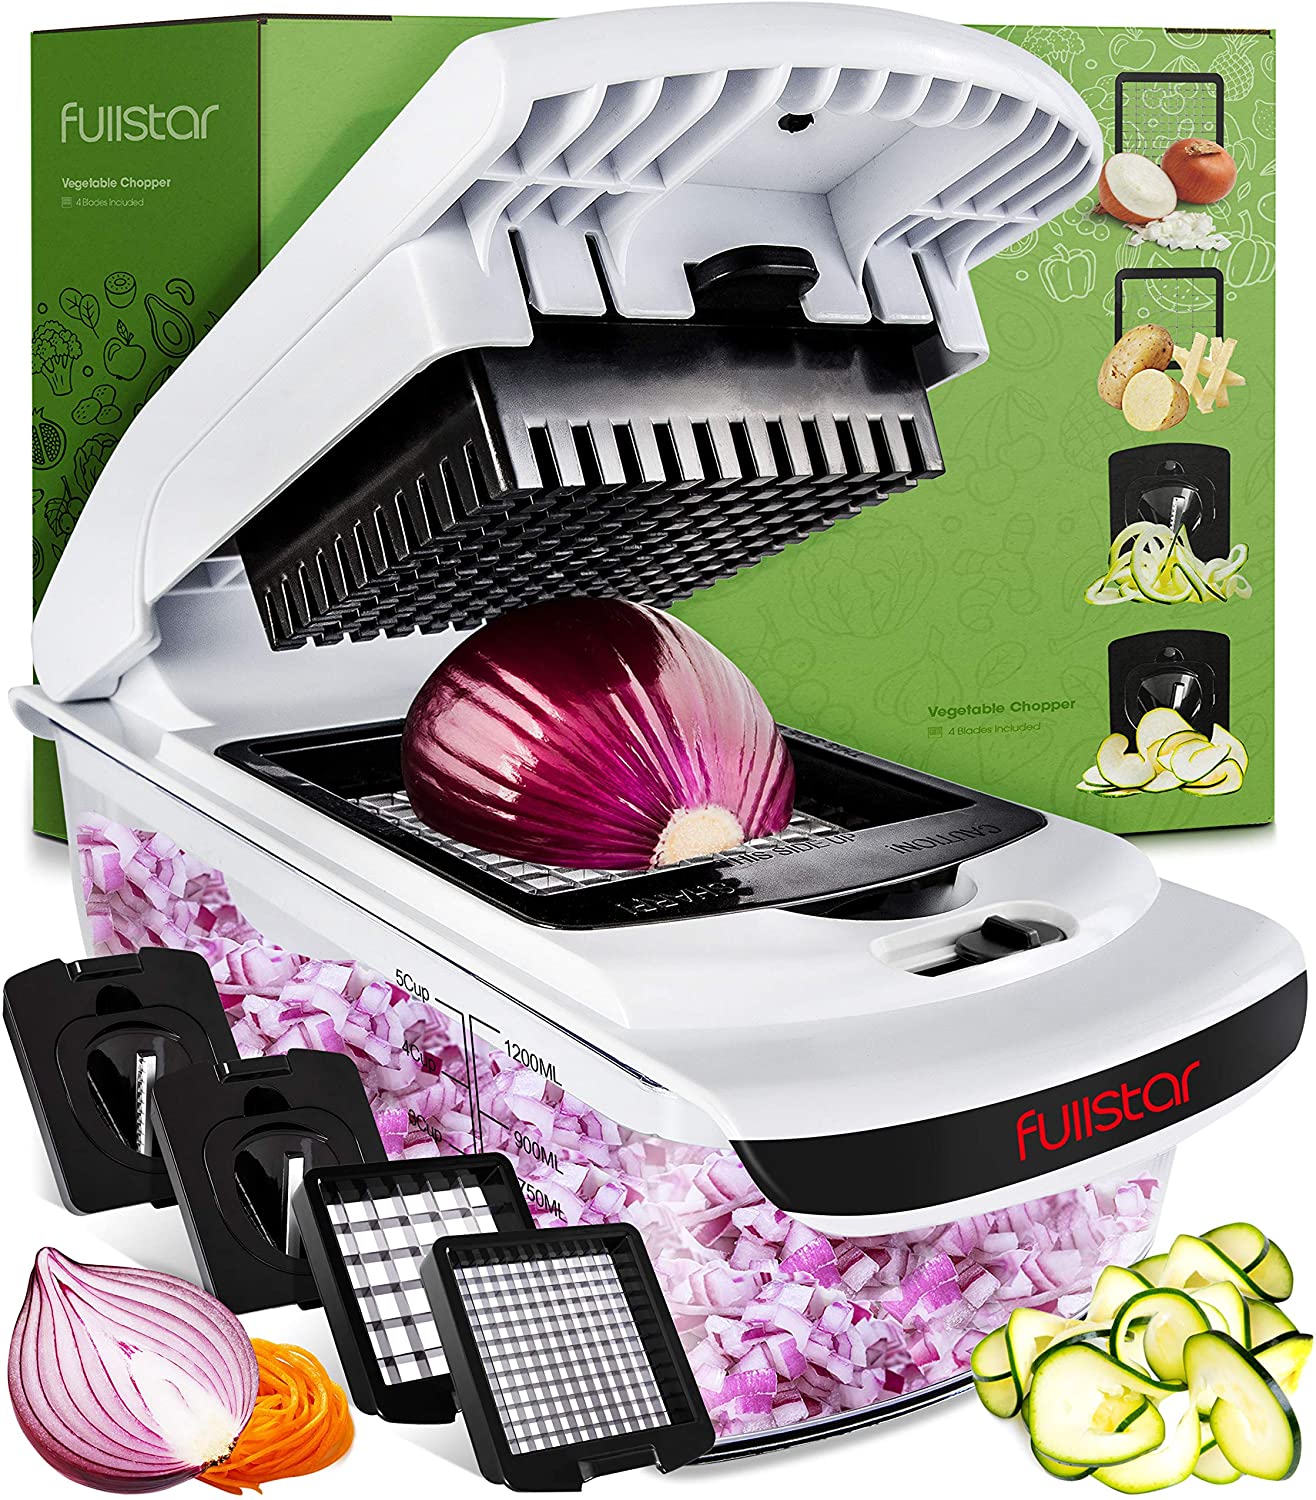 Picture showing onion chopper